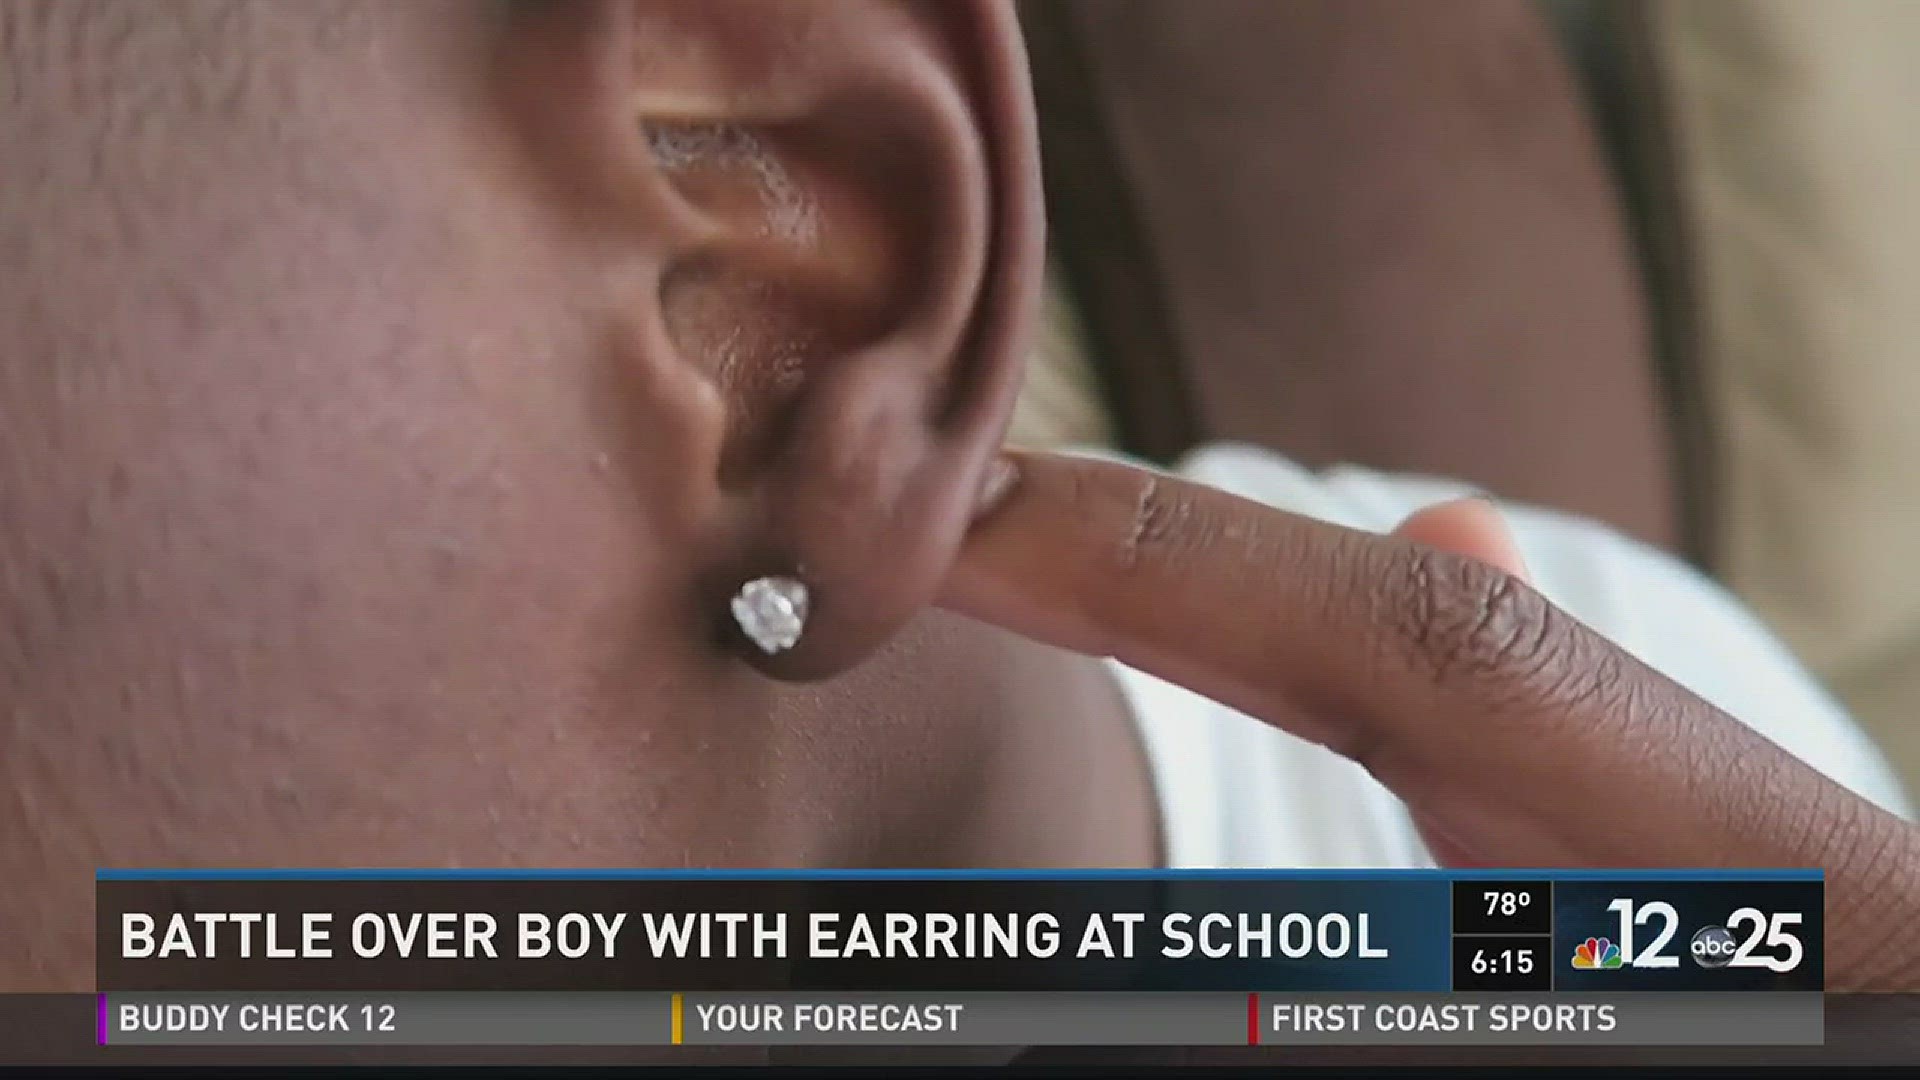 School earring controversy